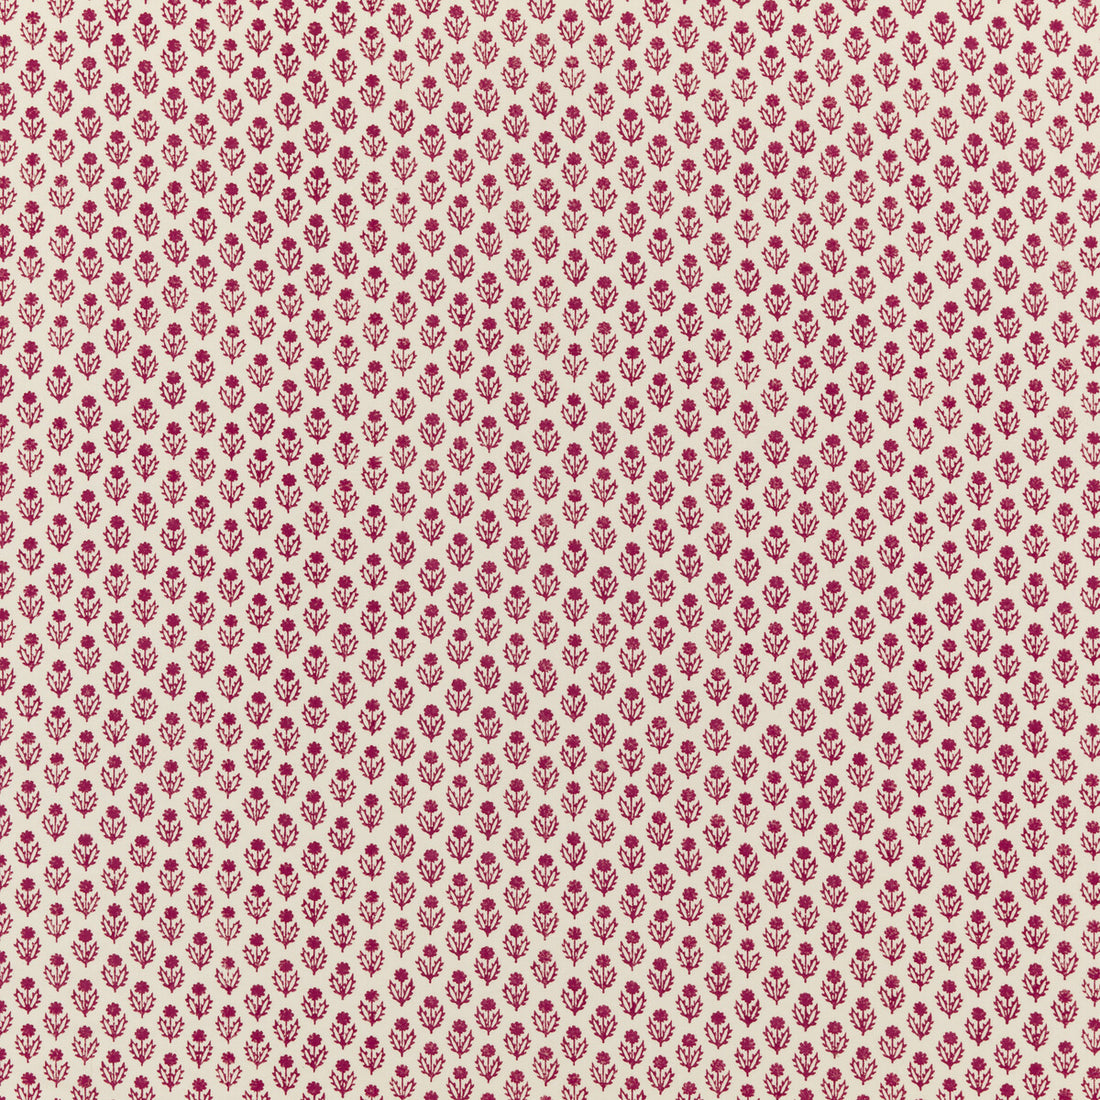 Avila fabric in fuchsia color - pattern PP50451.2.0 - by Baker Lifestyle in the Homes &amp; Gardens III collection